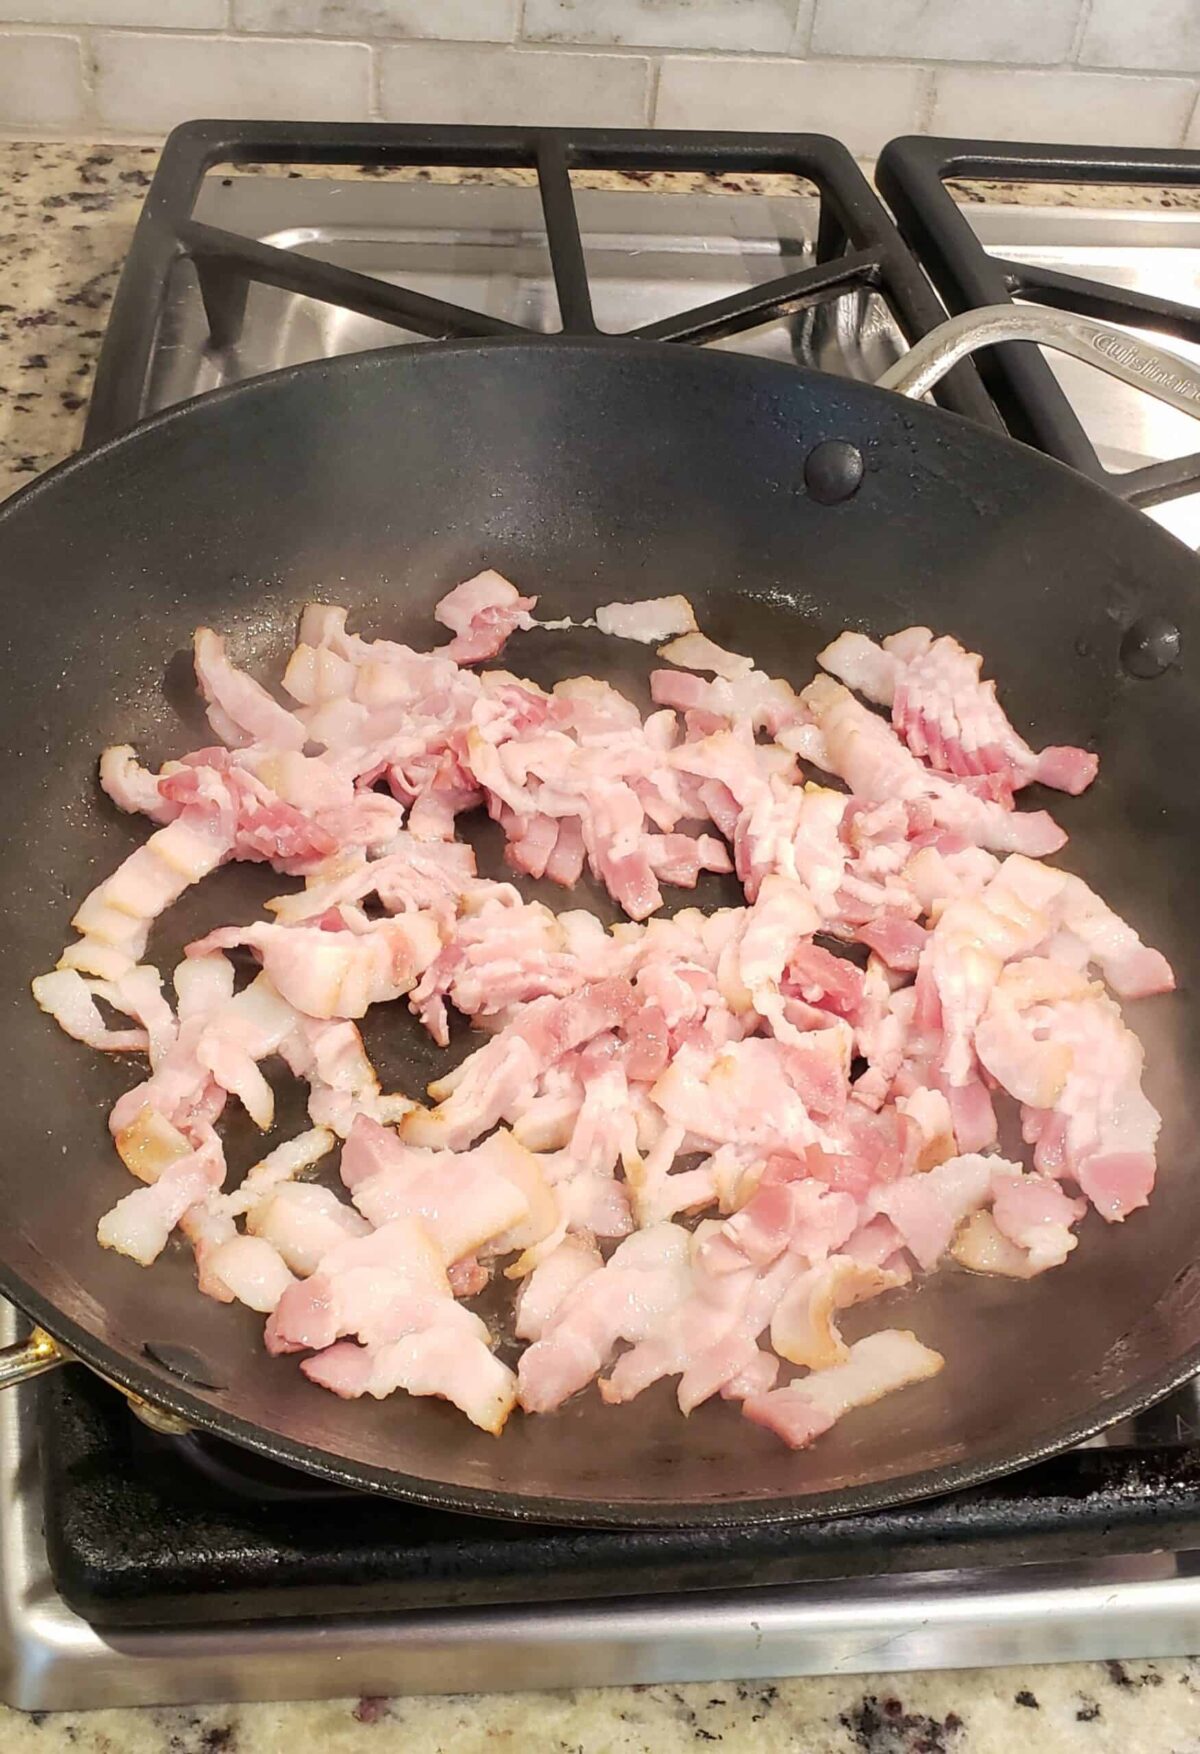 Raw bacon pieces in skillet before frying